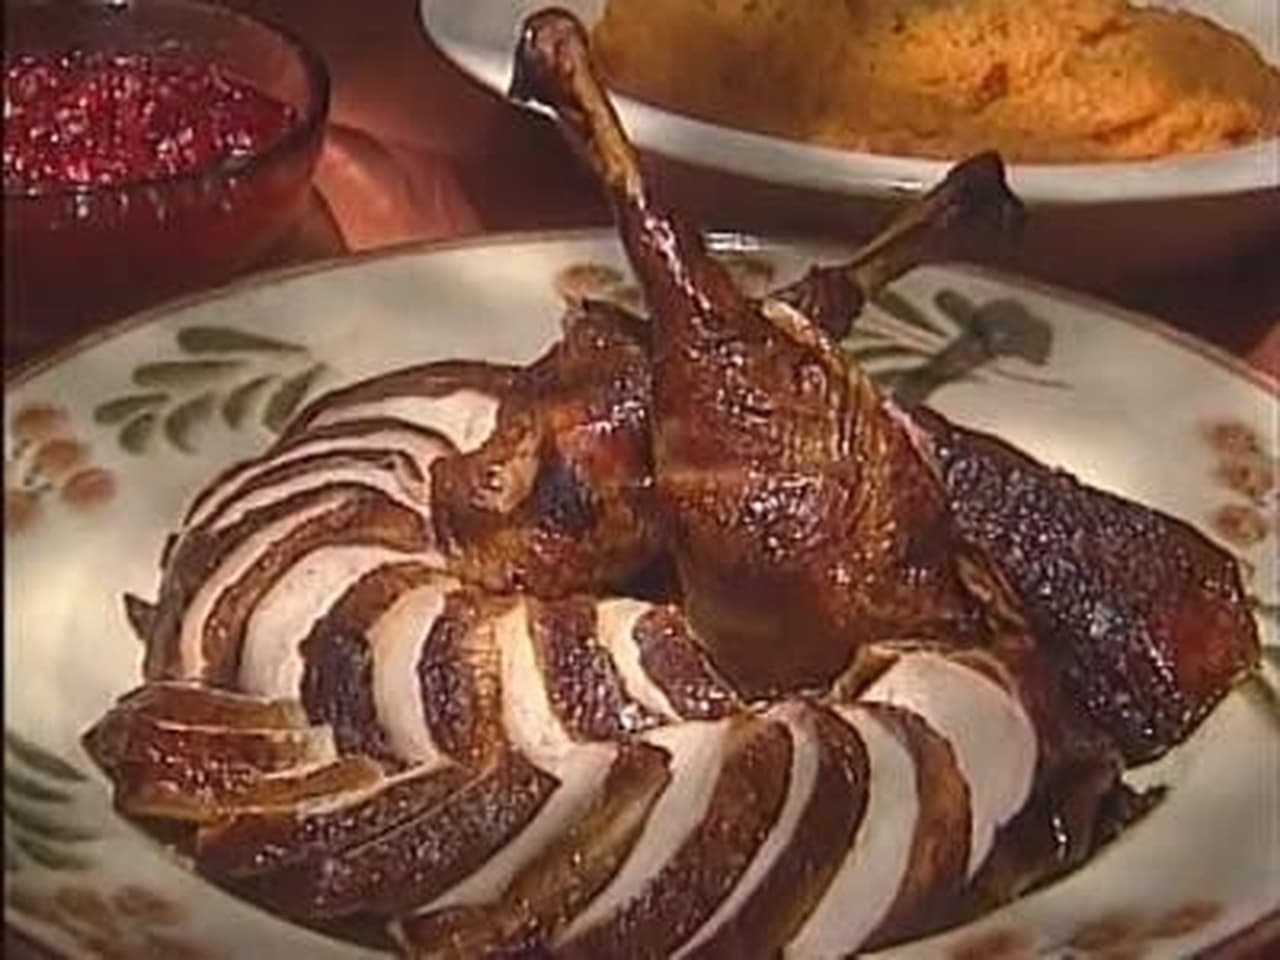 America's Test Kitchen - Season 3 Episode 16 : Thanksgiving from the Grill